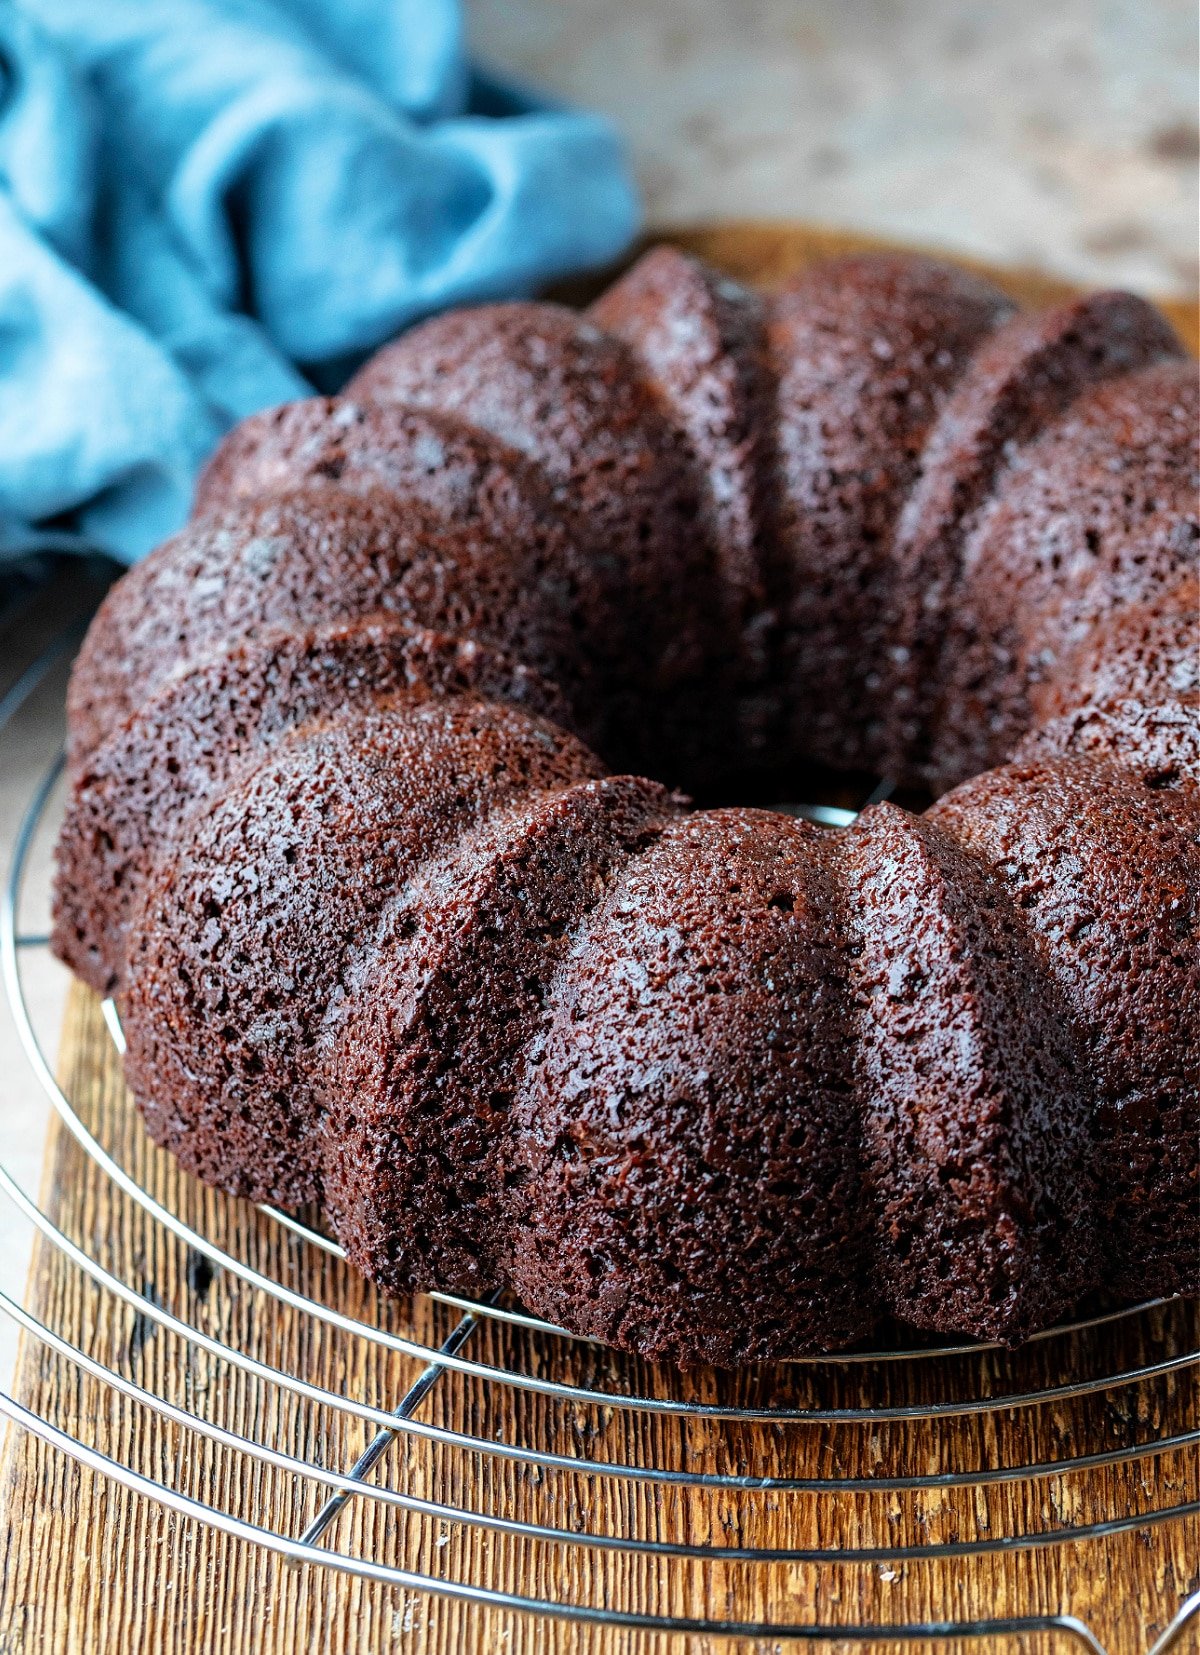 Chocolate bundt cake on a wire cooling rack